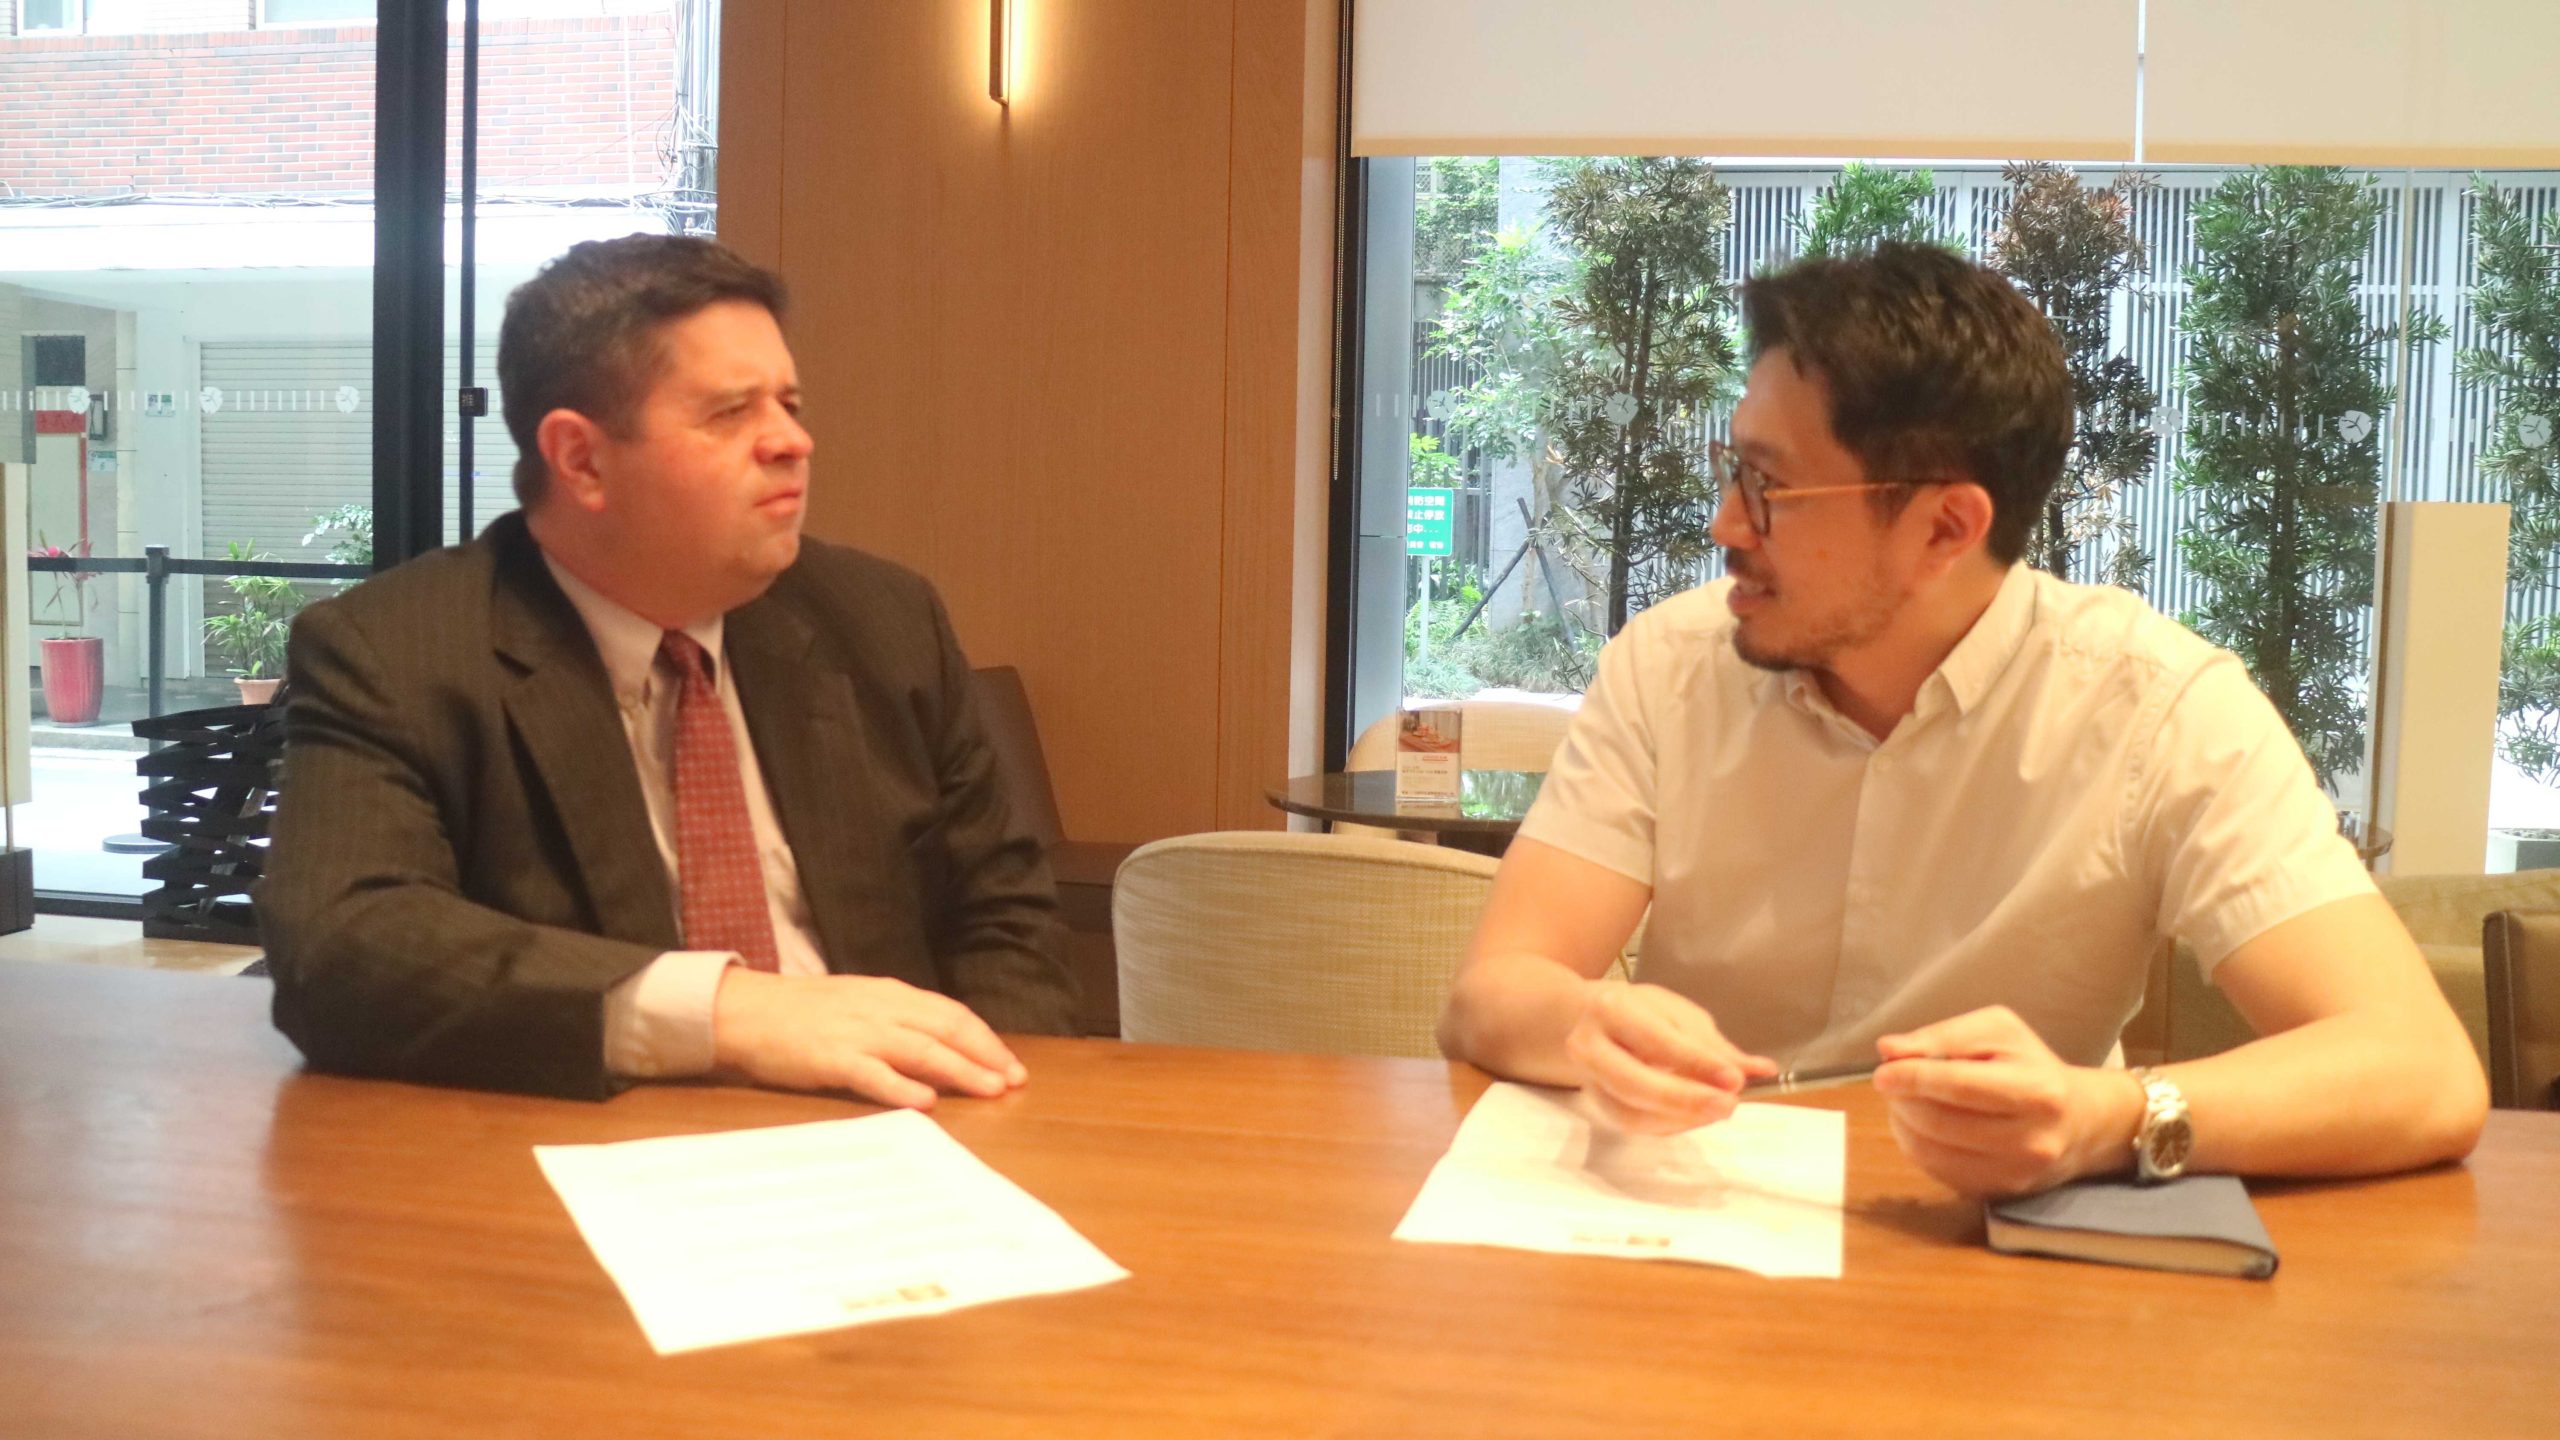 Prof. Brian Van Tine, MD, PhD interviewed by Thomas Huang, CEO of GeneOnline